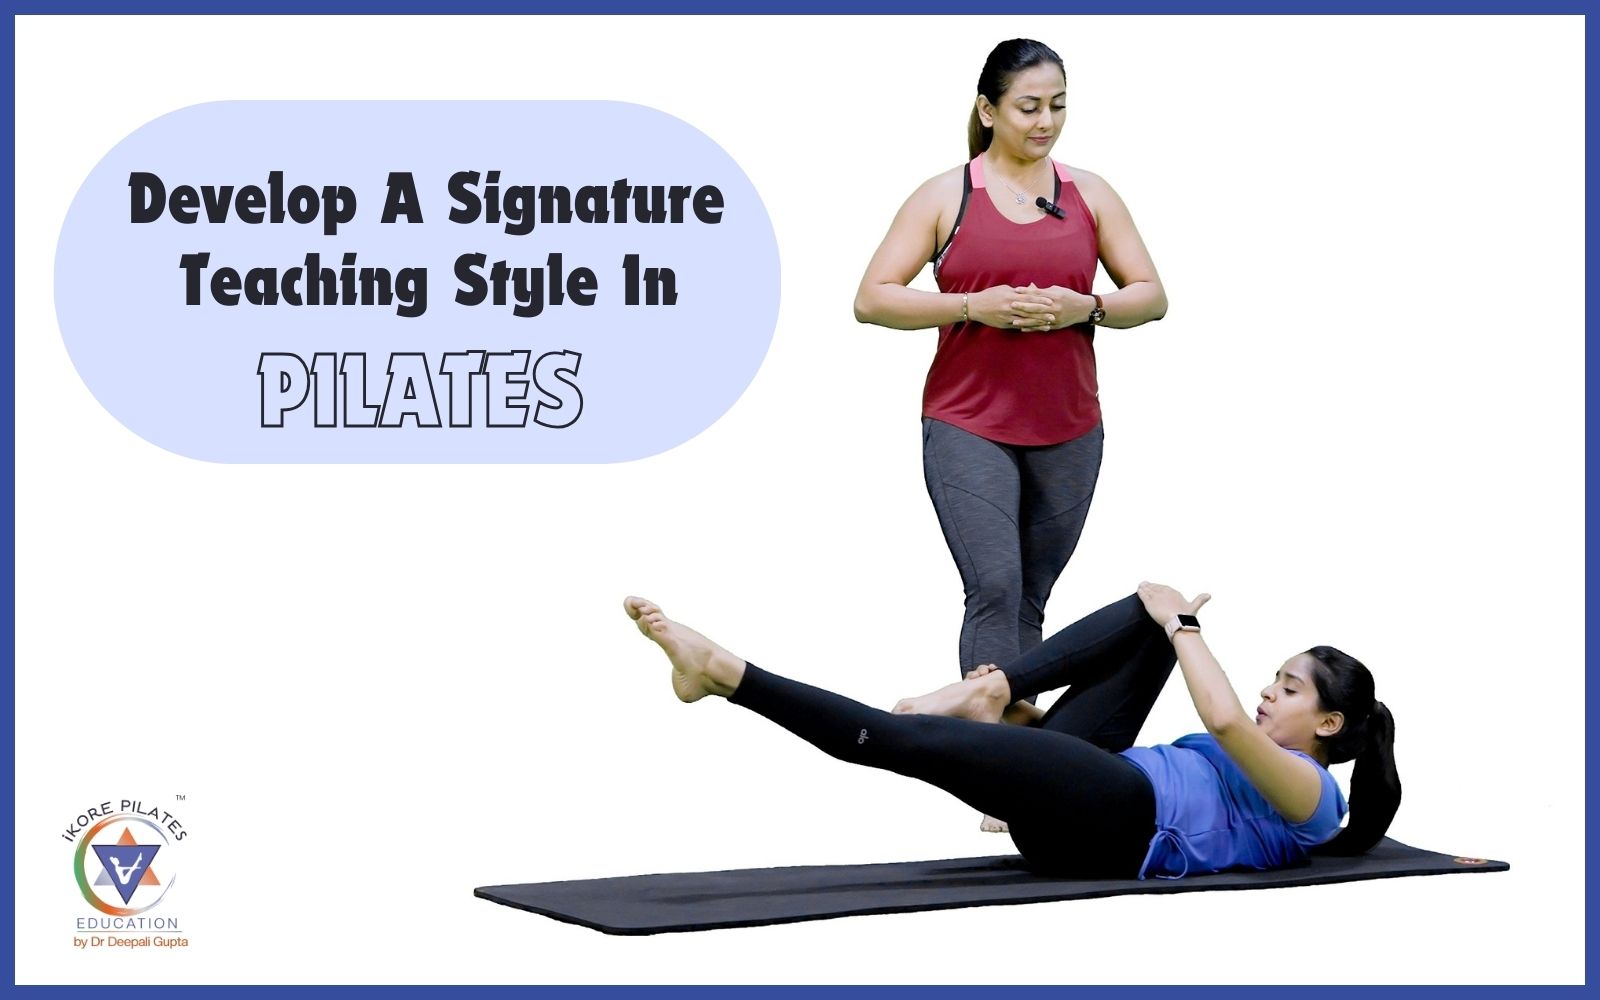 Mastering Your Signature Pilates Teaching Style